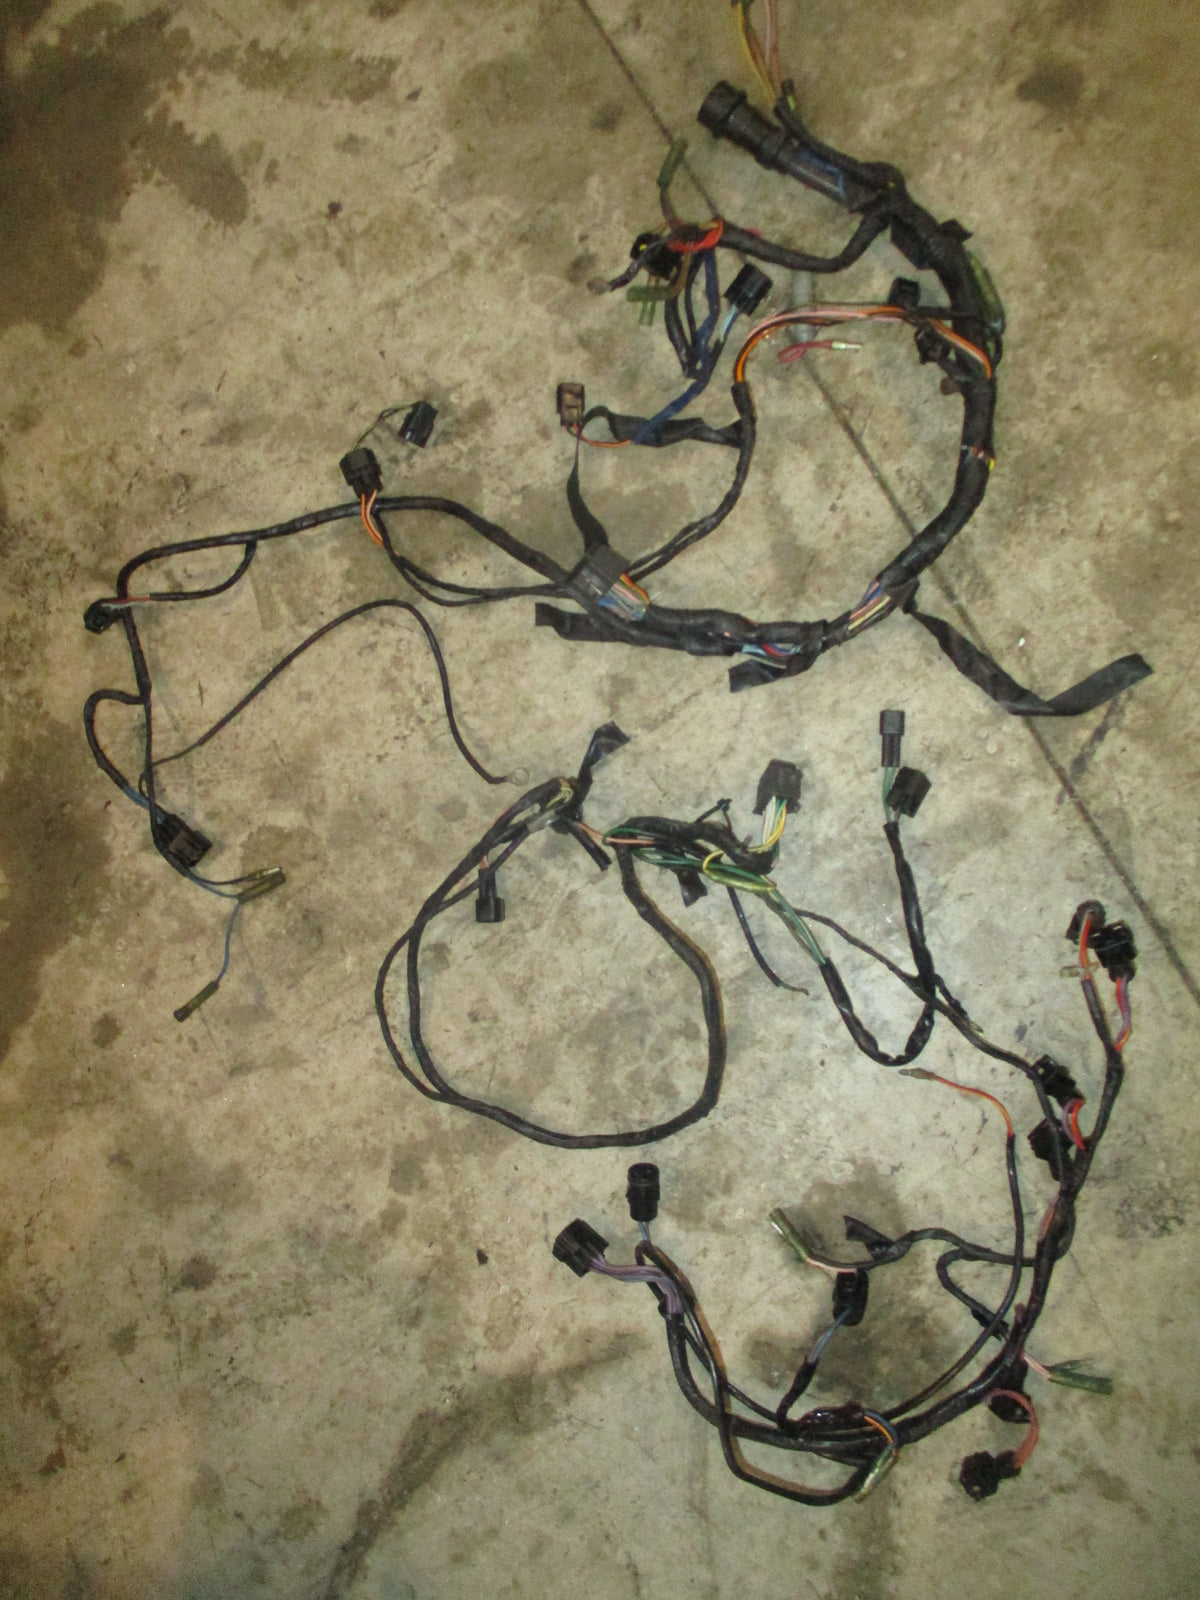 Yamaha OX66 225hp 2 stroke outboard Wiring harness 65L-82590-00